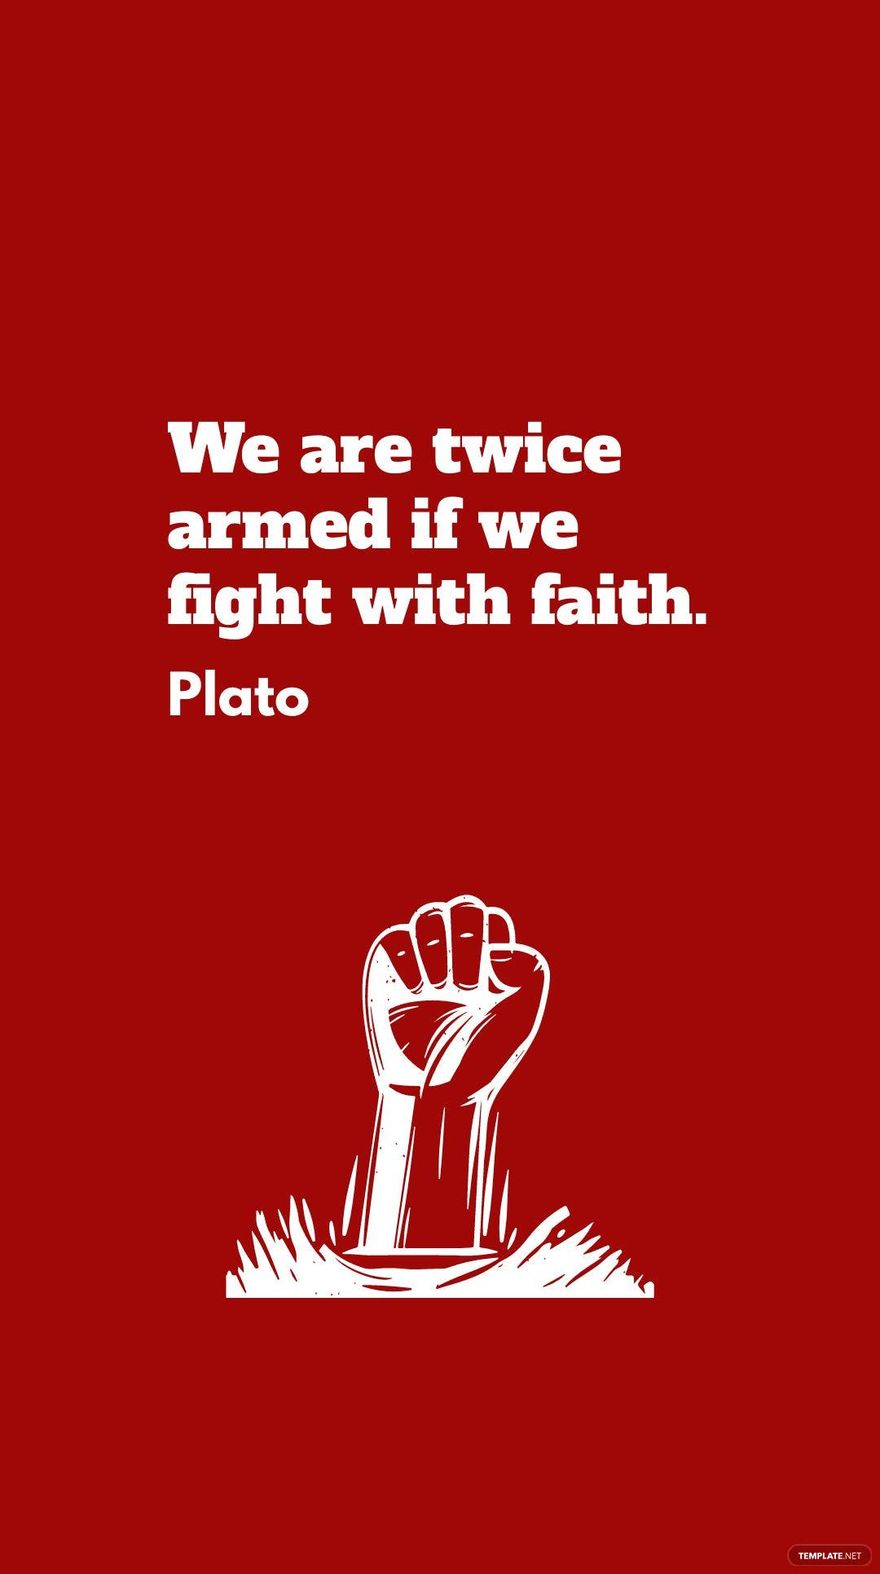 Free Plato - We are twice armed if we fight with faith. in JPG